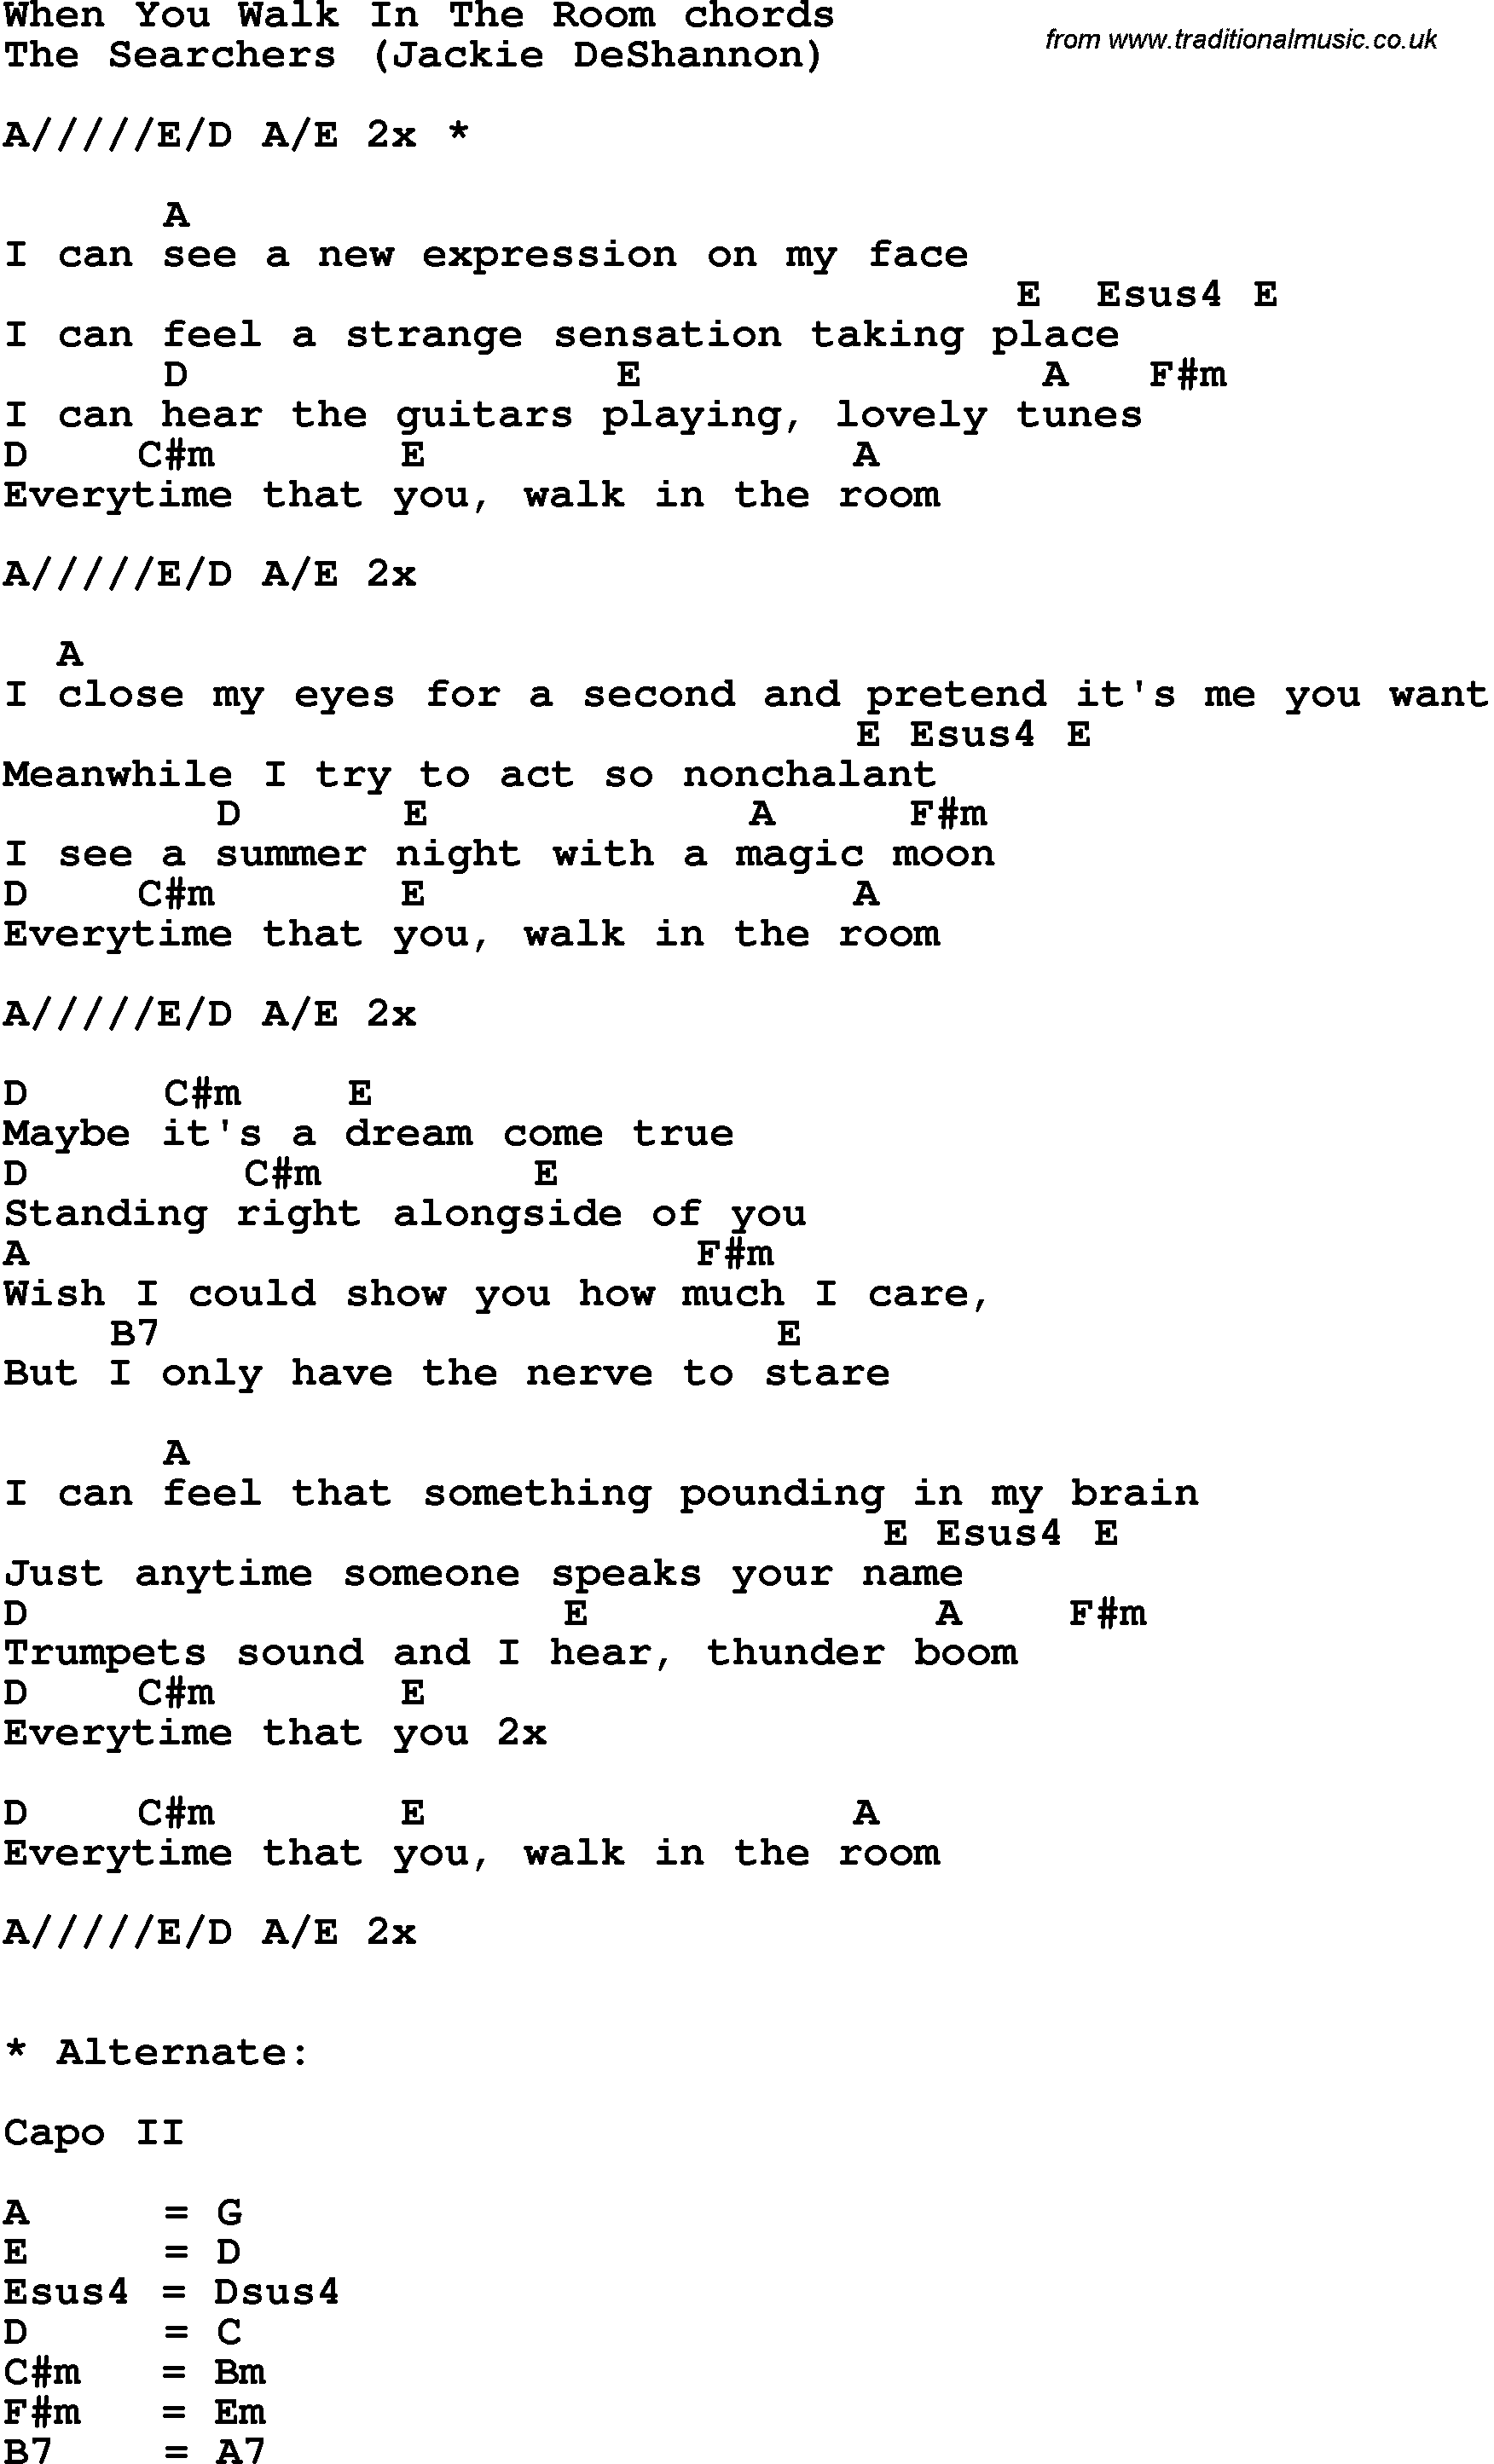 Song Lyrics with guitar chords for When You Walk In The Room